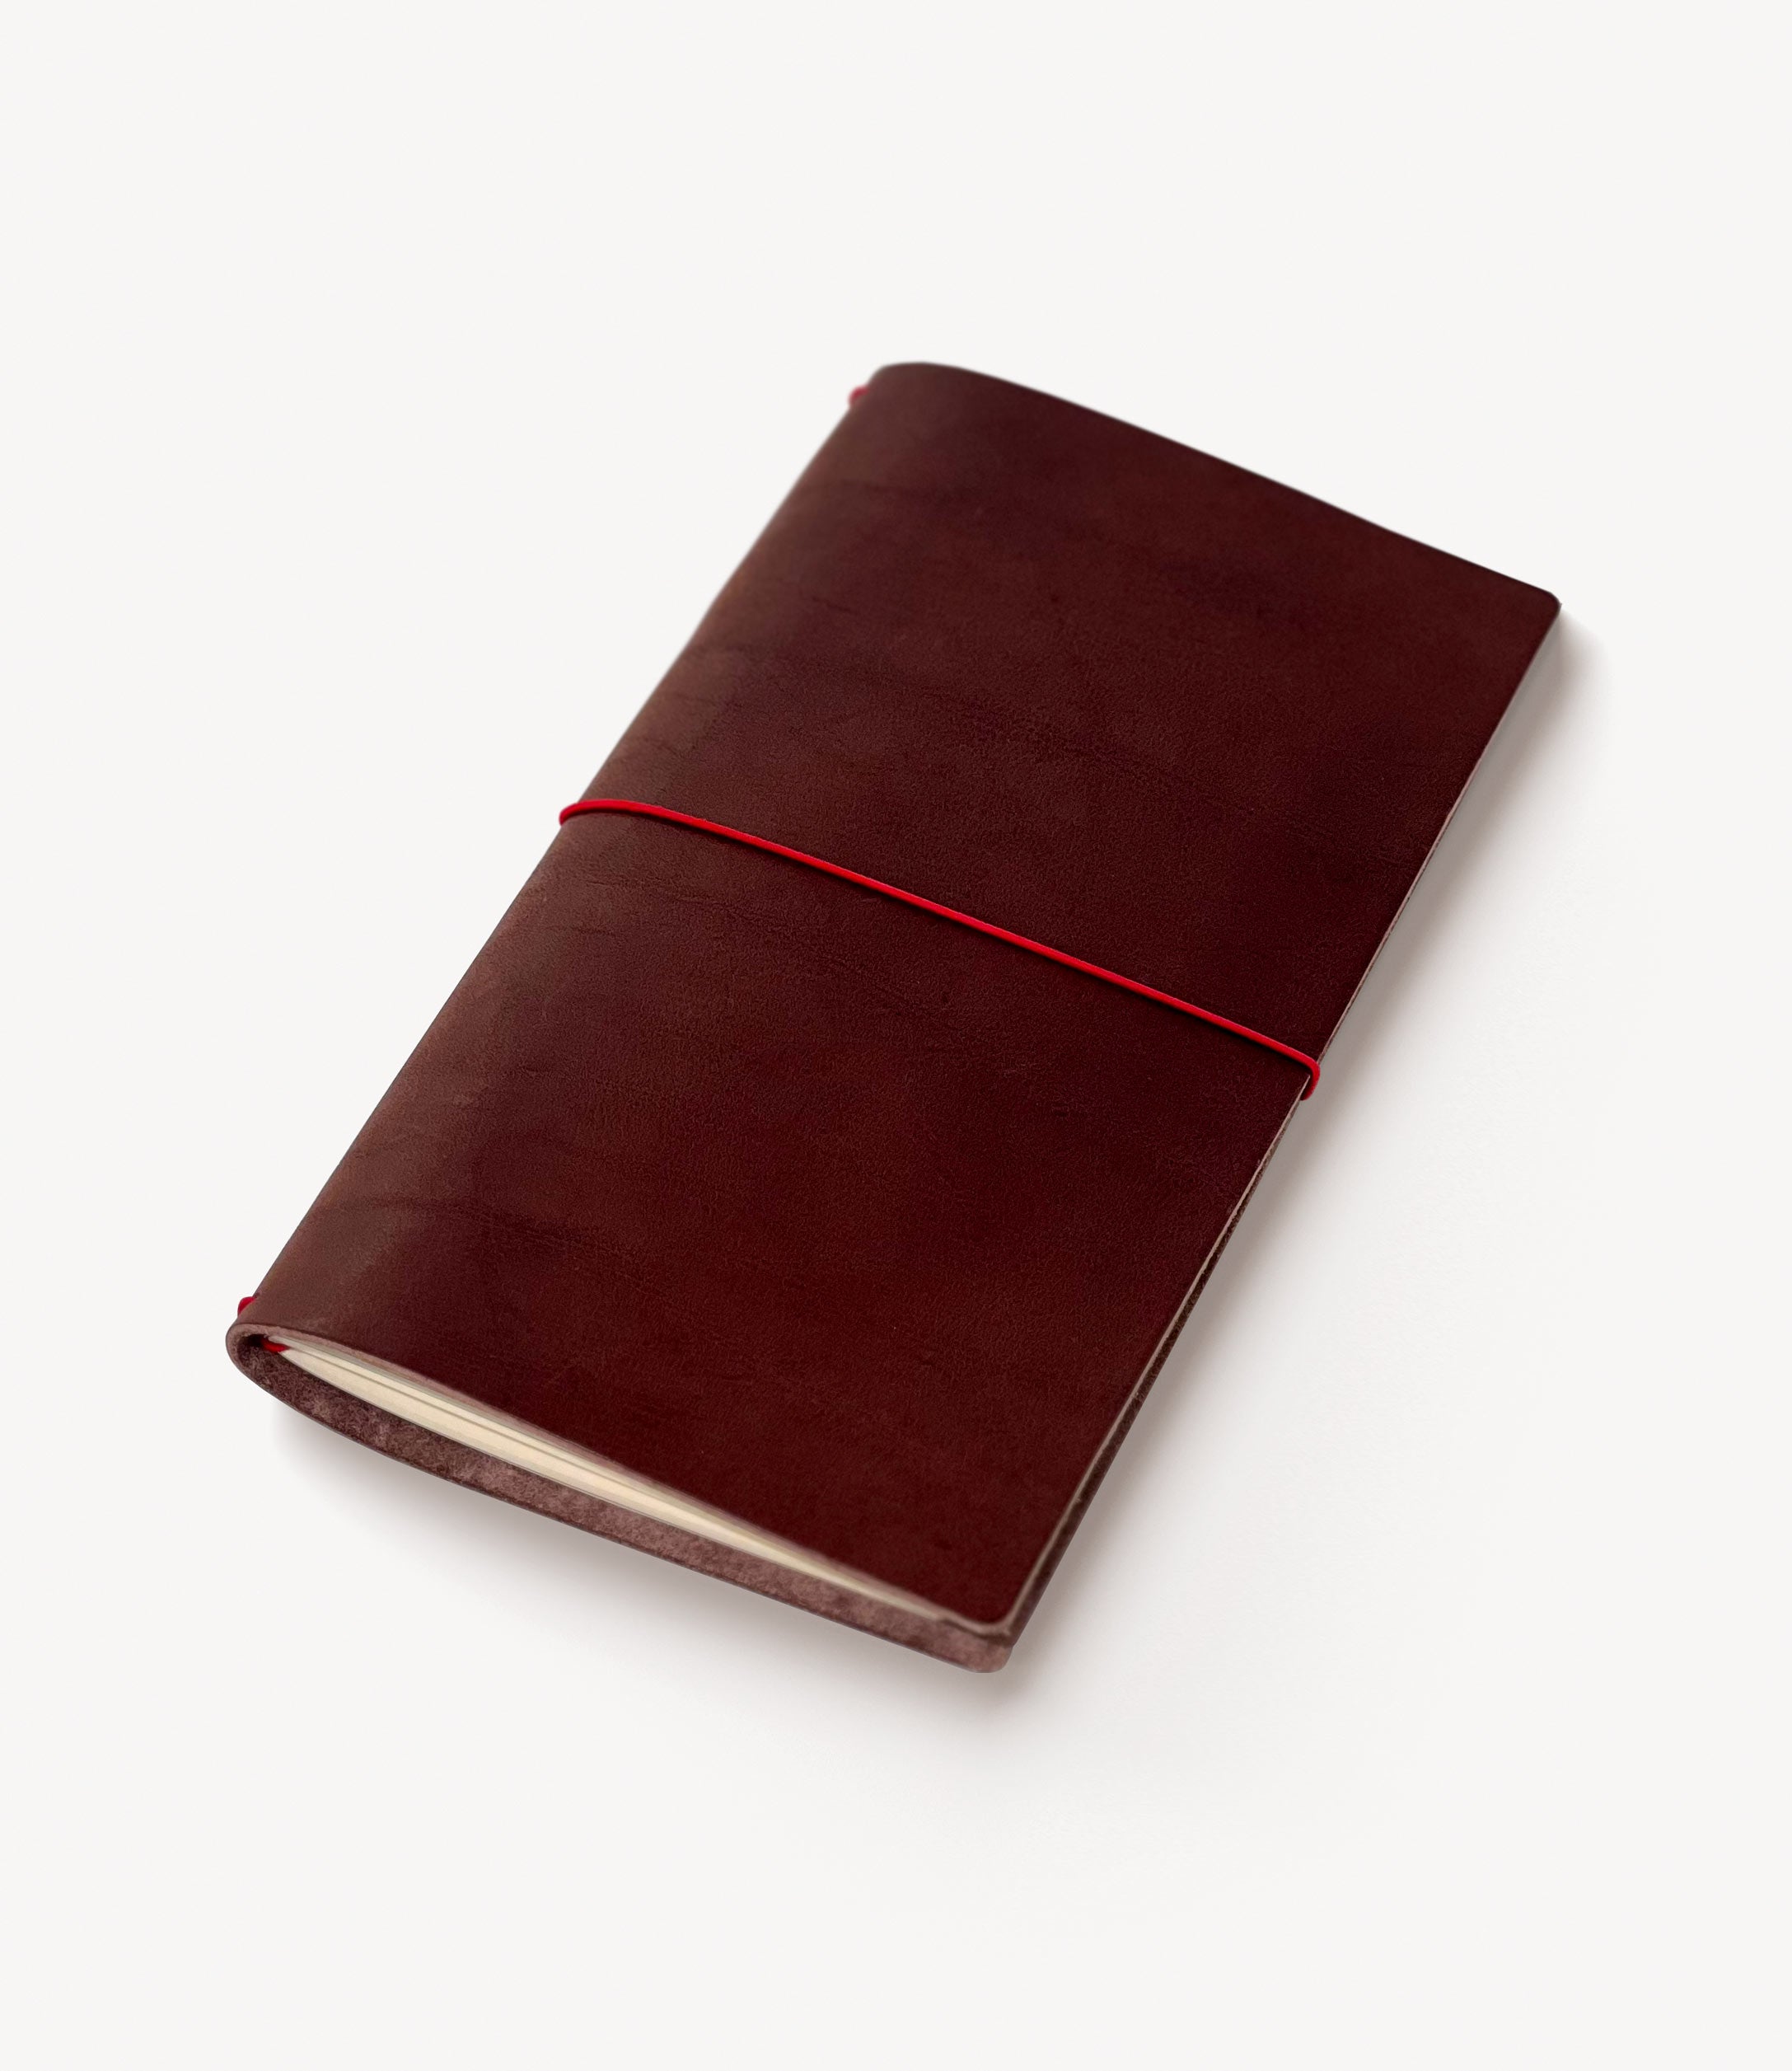 Acrobat Leather Notebook Cover. Slim size. Brown color